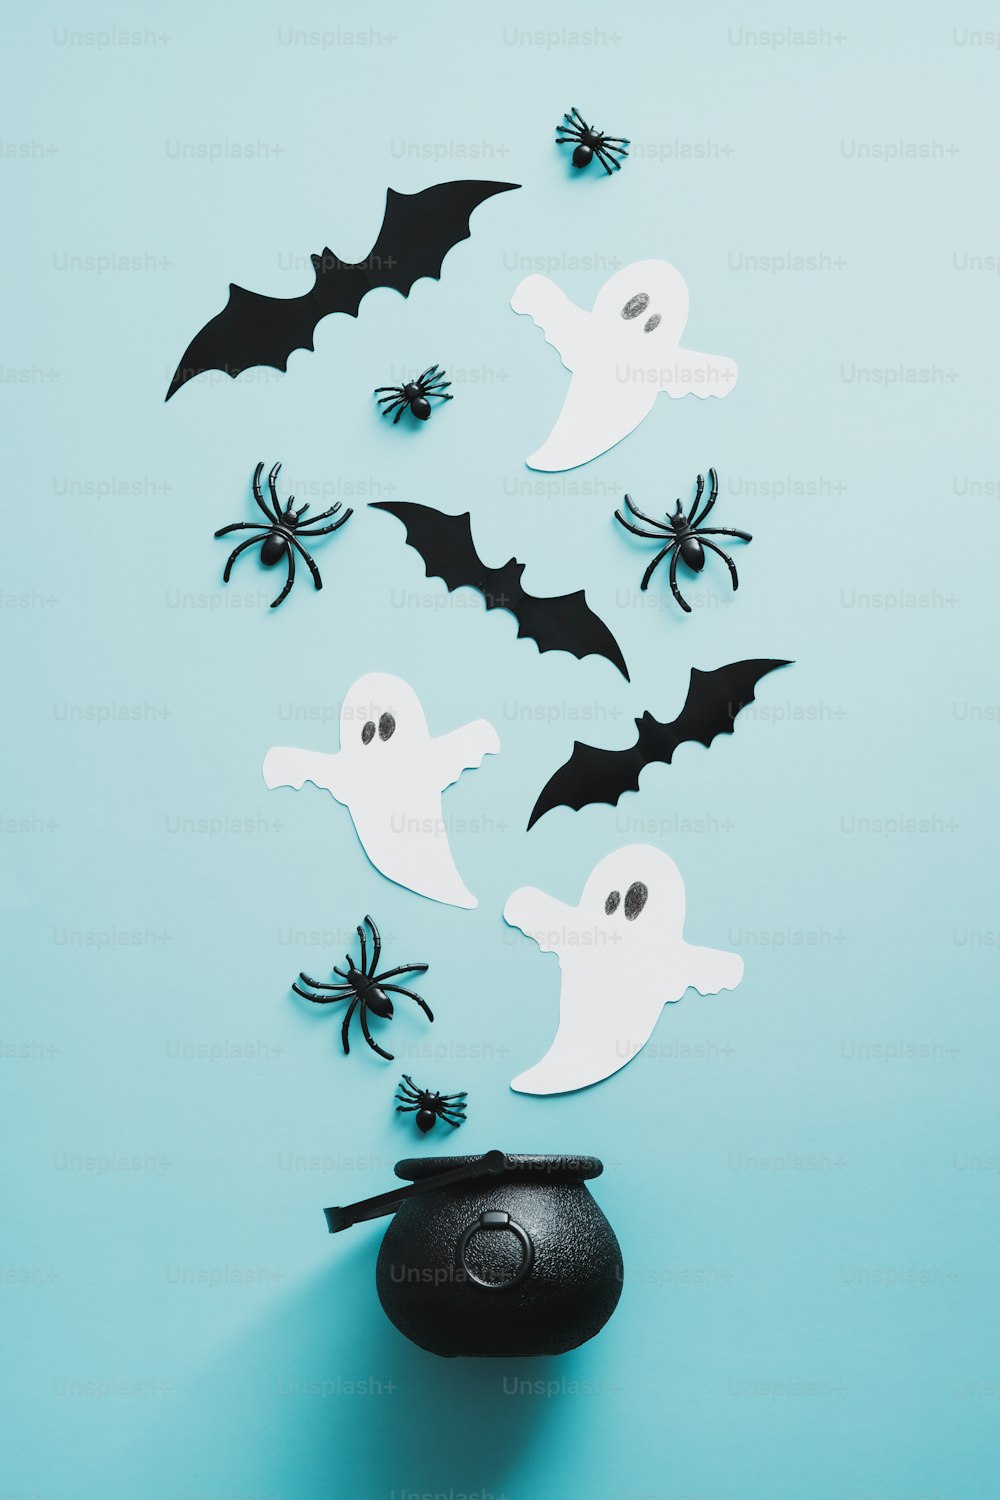 Spooky evil spirits and witch pot on blue background. Flat lay, top view spiders, paper ghosts, bats.